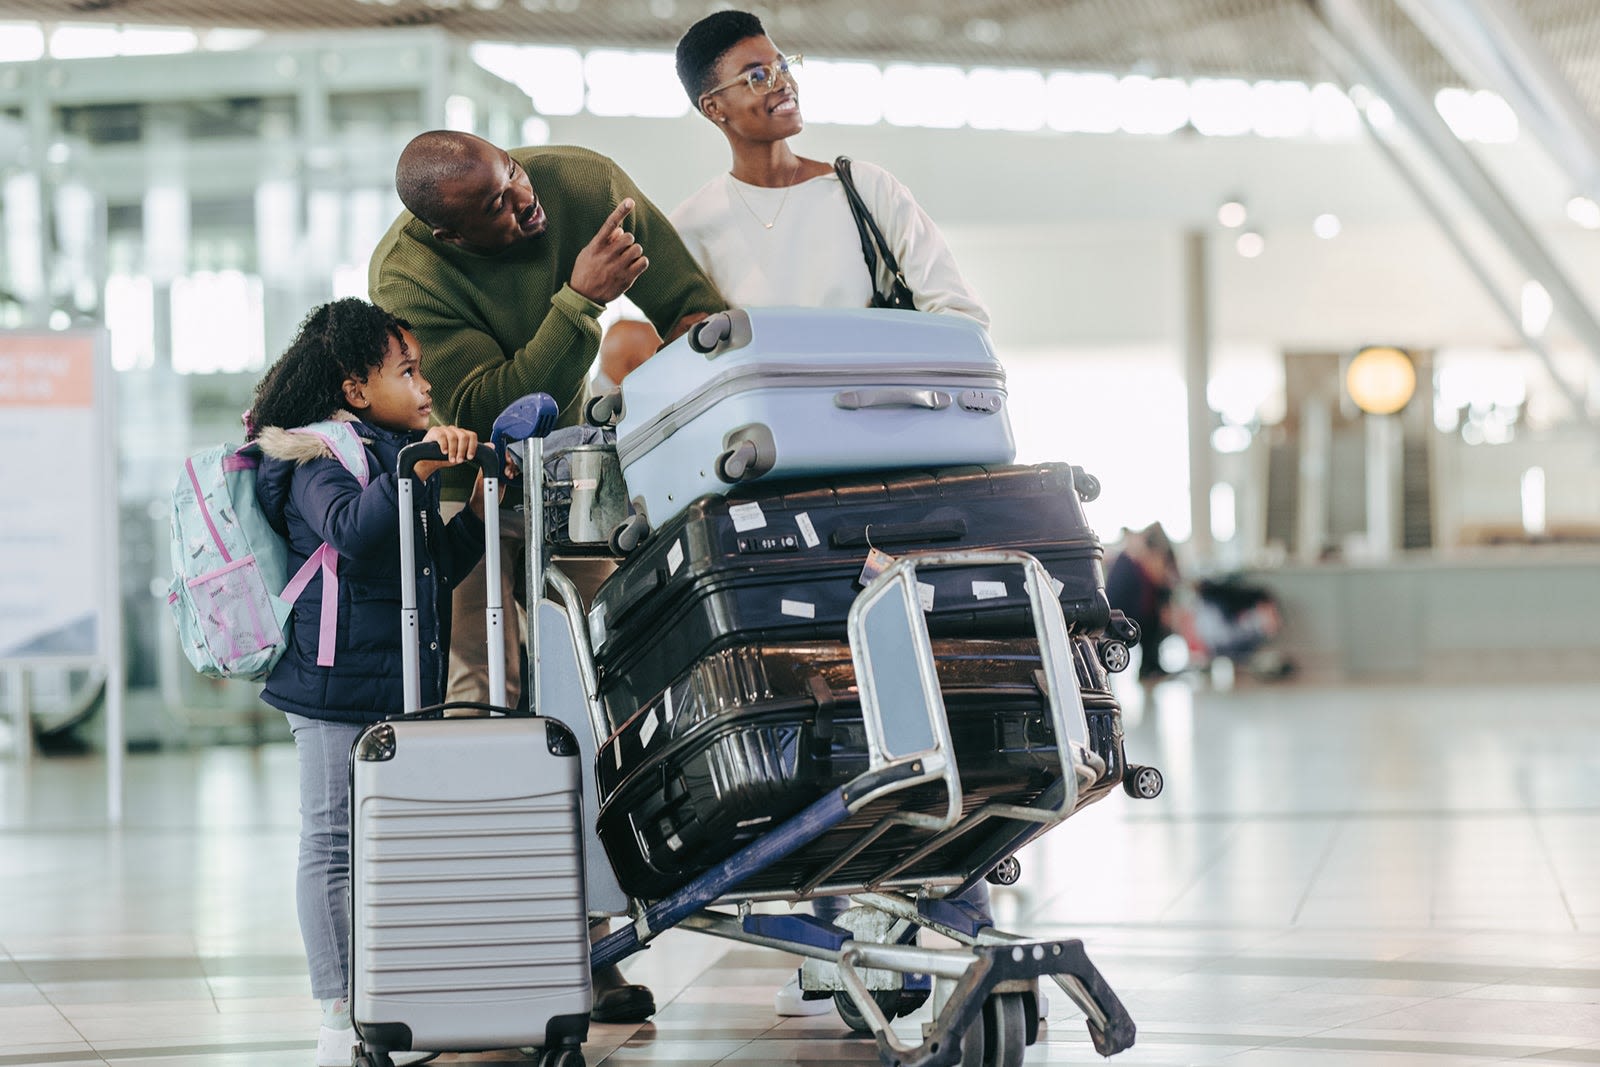 Booking award flights with kids' frequent-flyer miles - The Points Guy